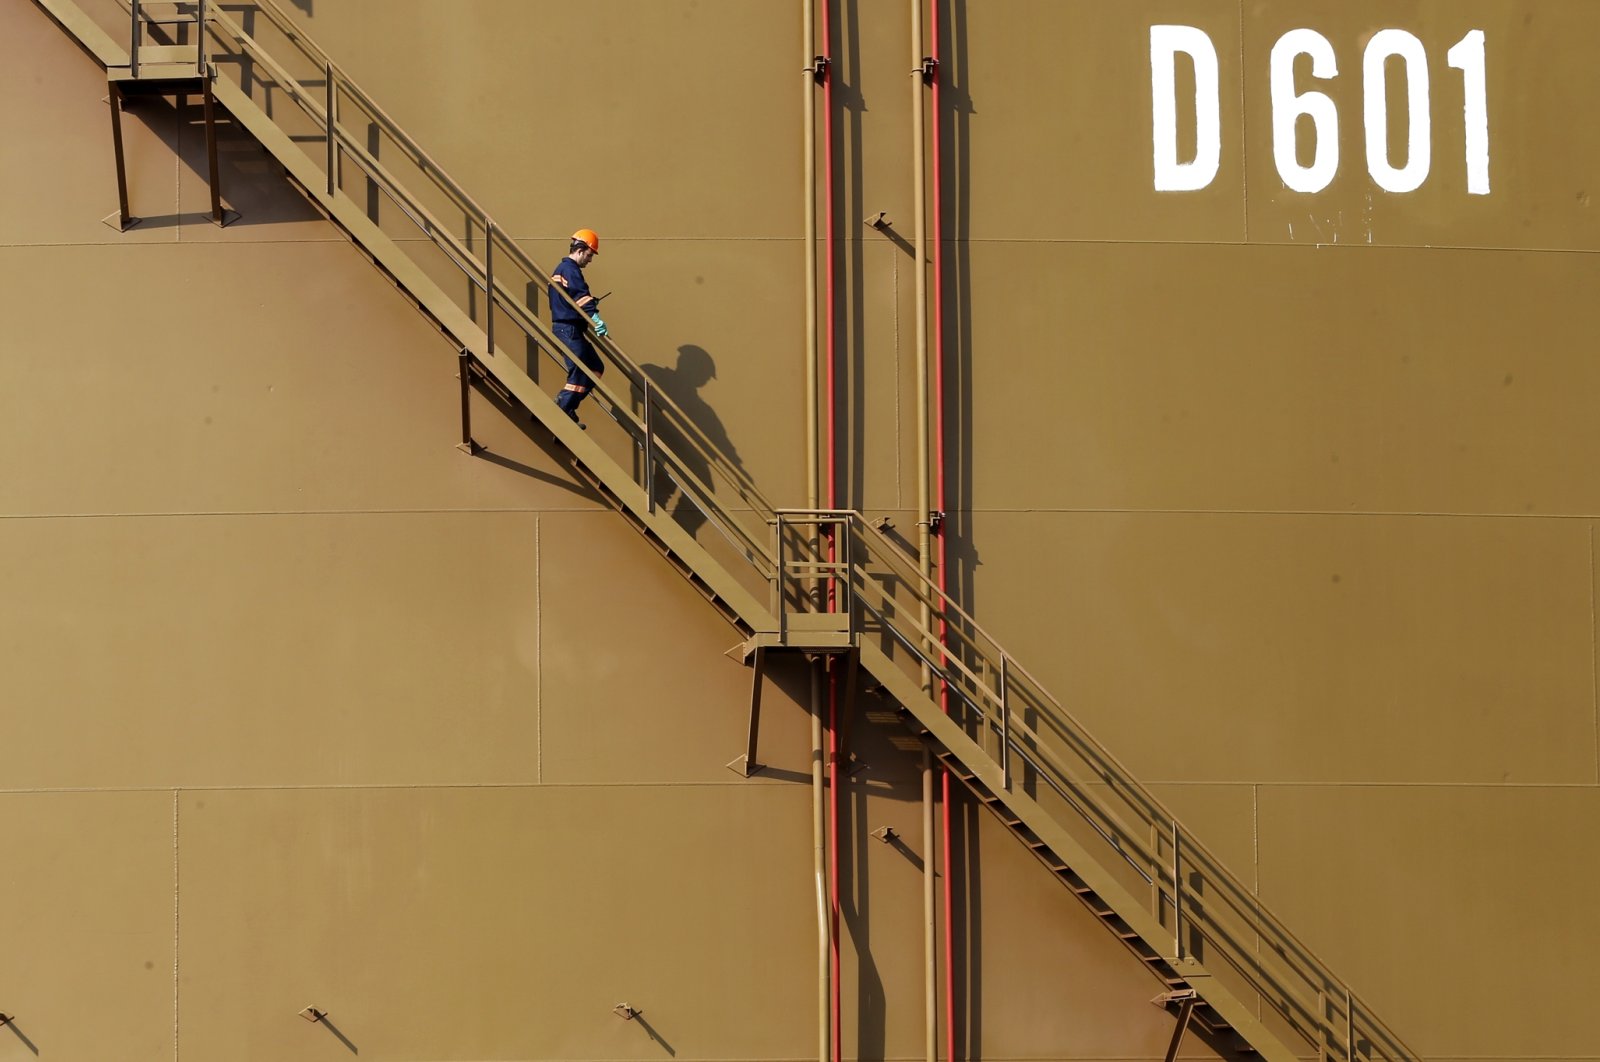 A worker walks down the stairs of an oil tank at the Mediterranean port of Ceyhan, some 70 kilometers (43.5 miles) from Adana, southern Türkiye, Feb. 19, 2014. (Reuters Photo)